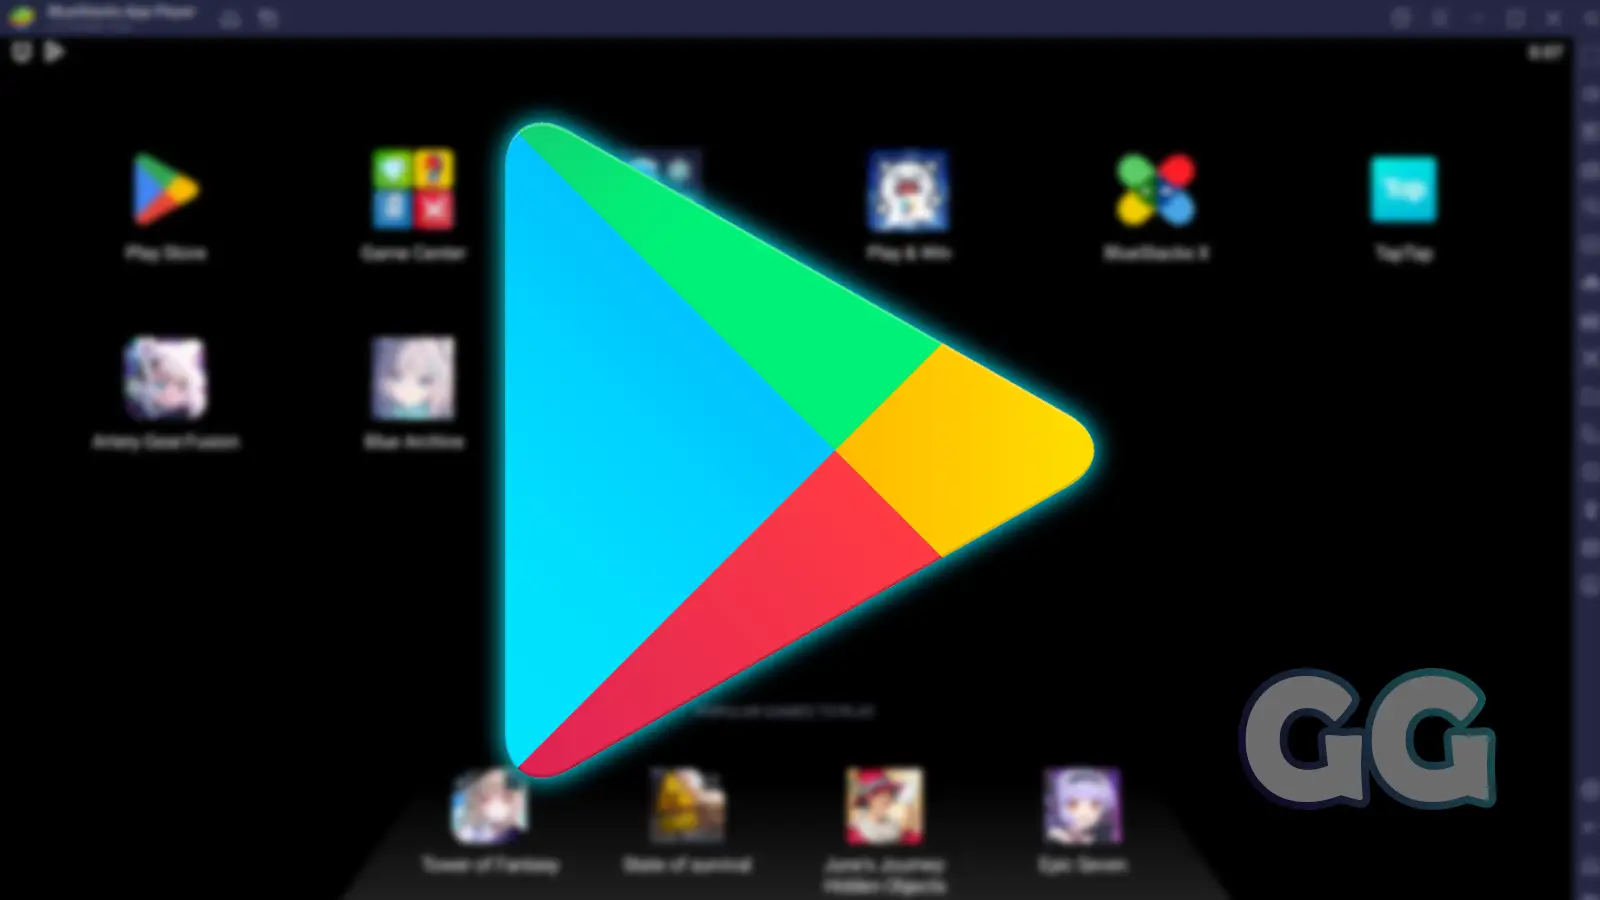 google play icon on blurred background showing bluestacks